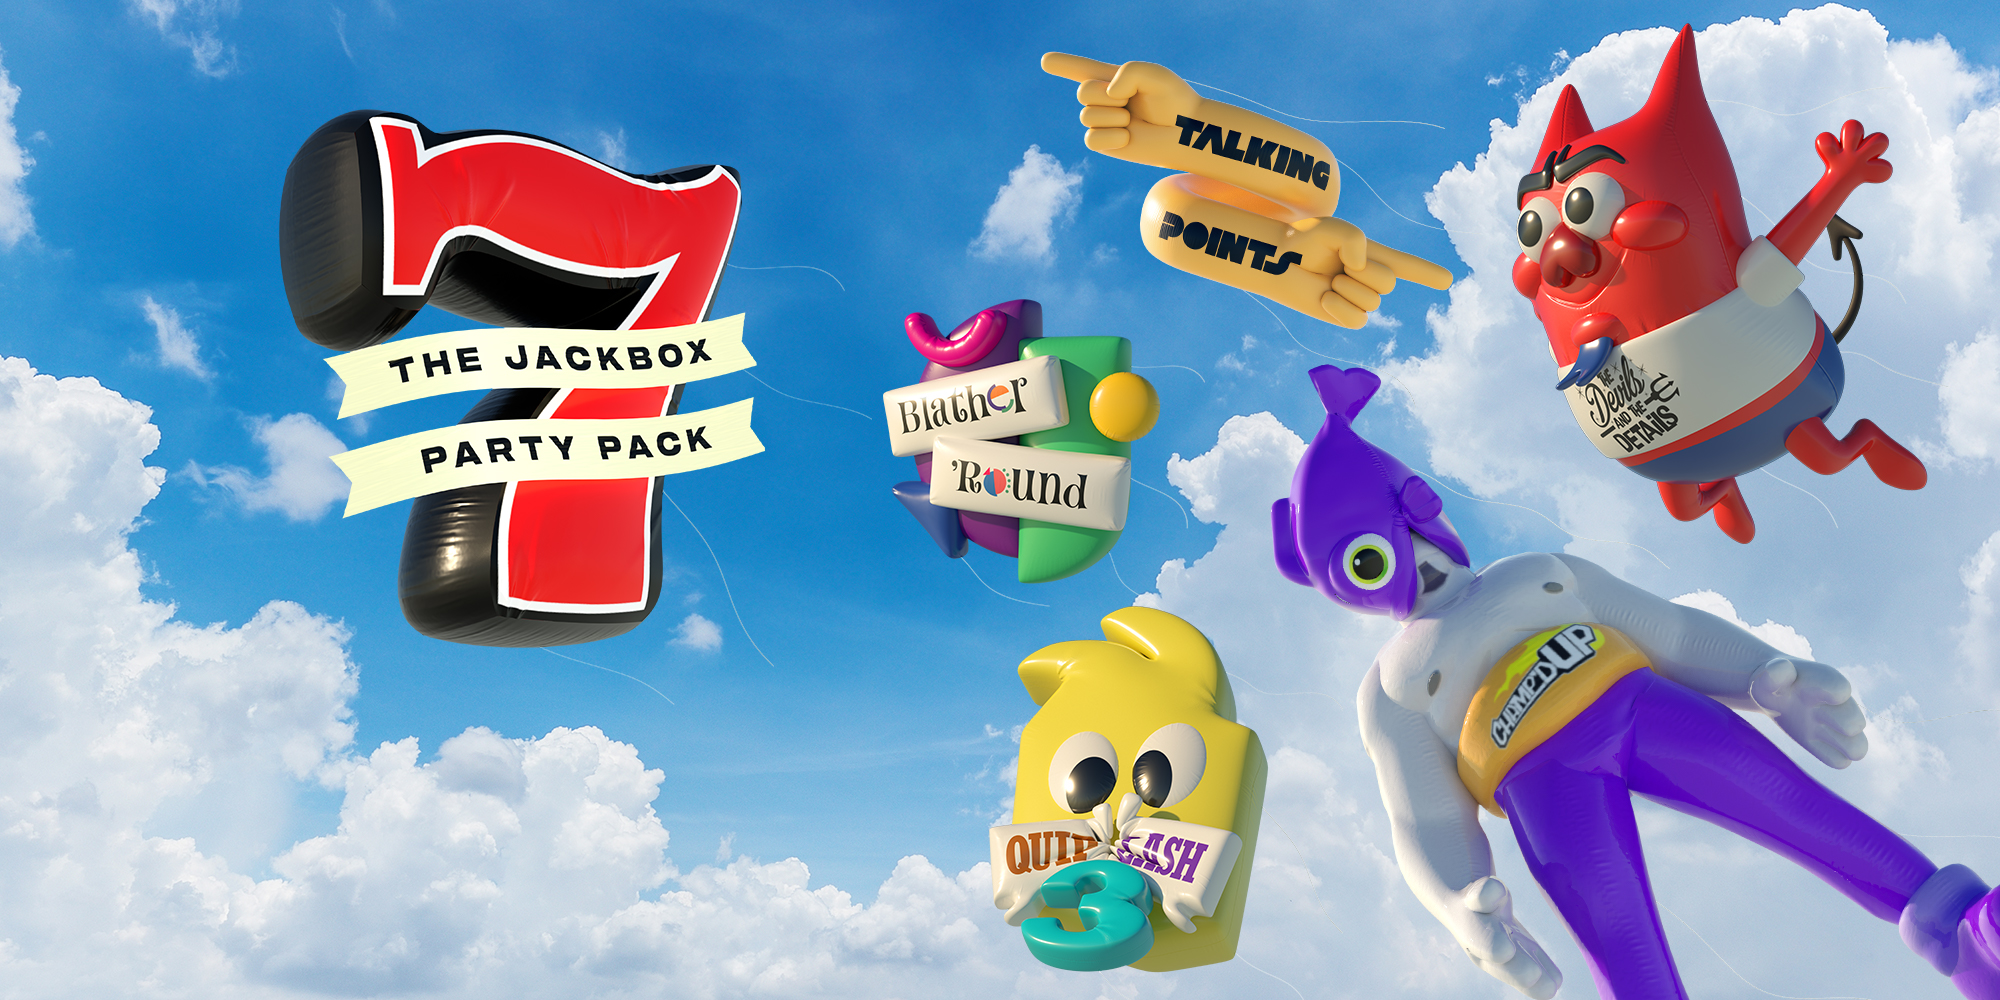 The Jackbox Party Pack 7 Game Download